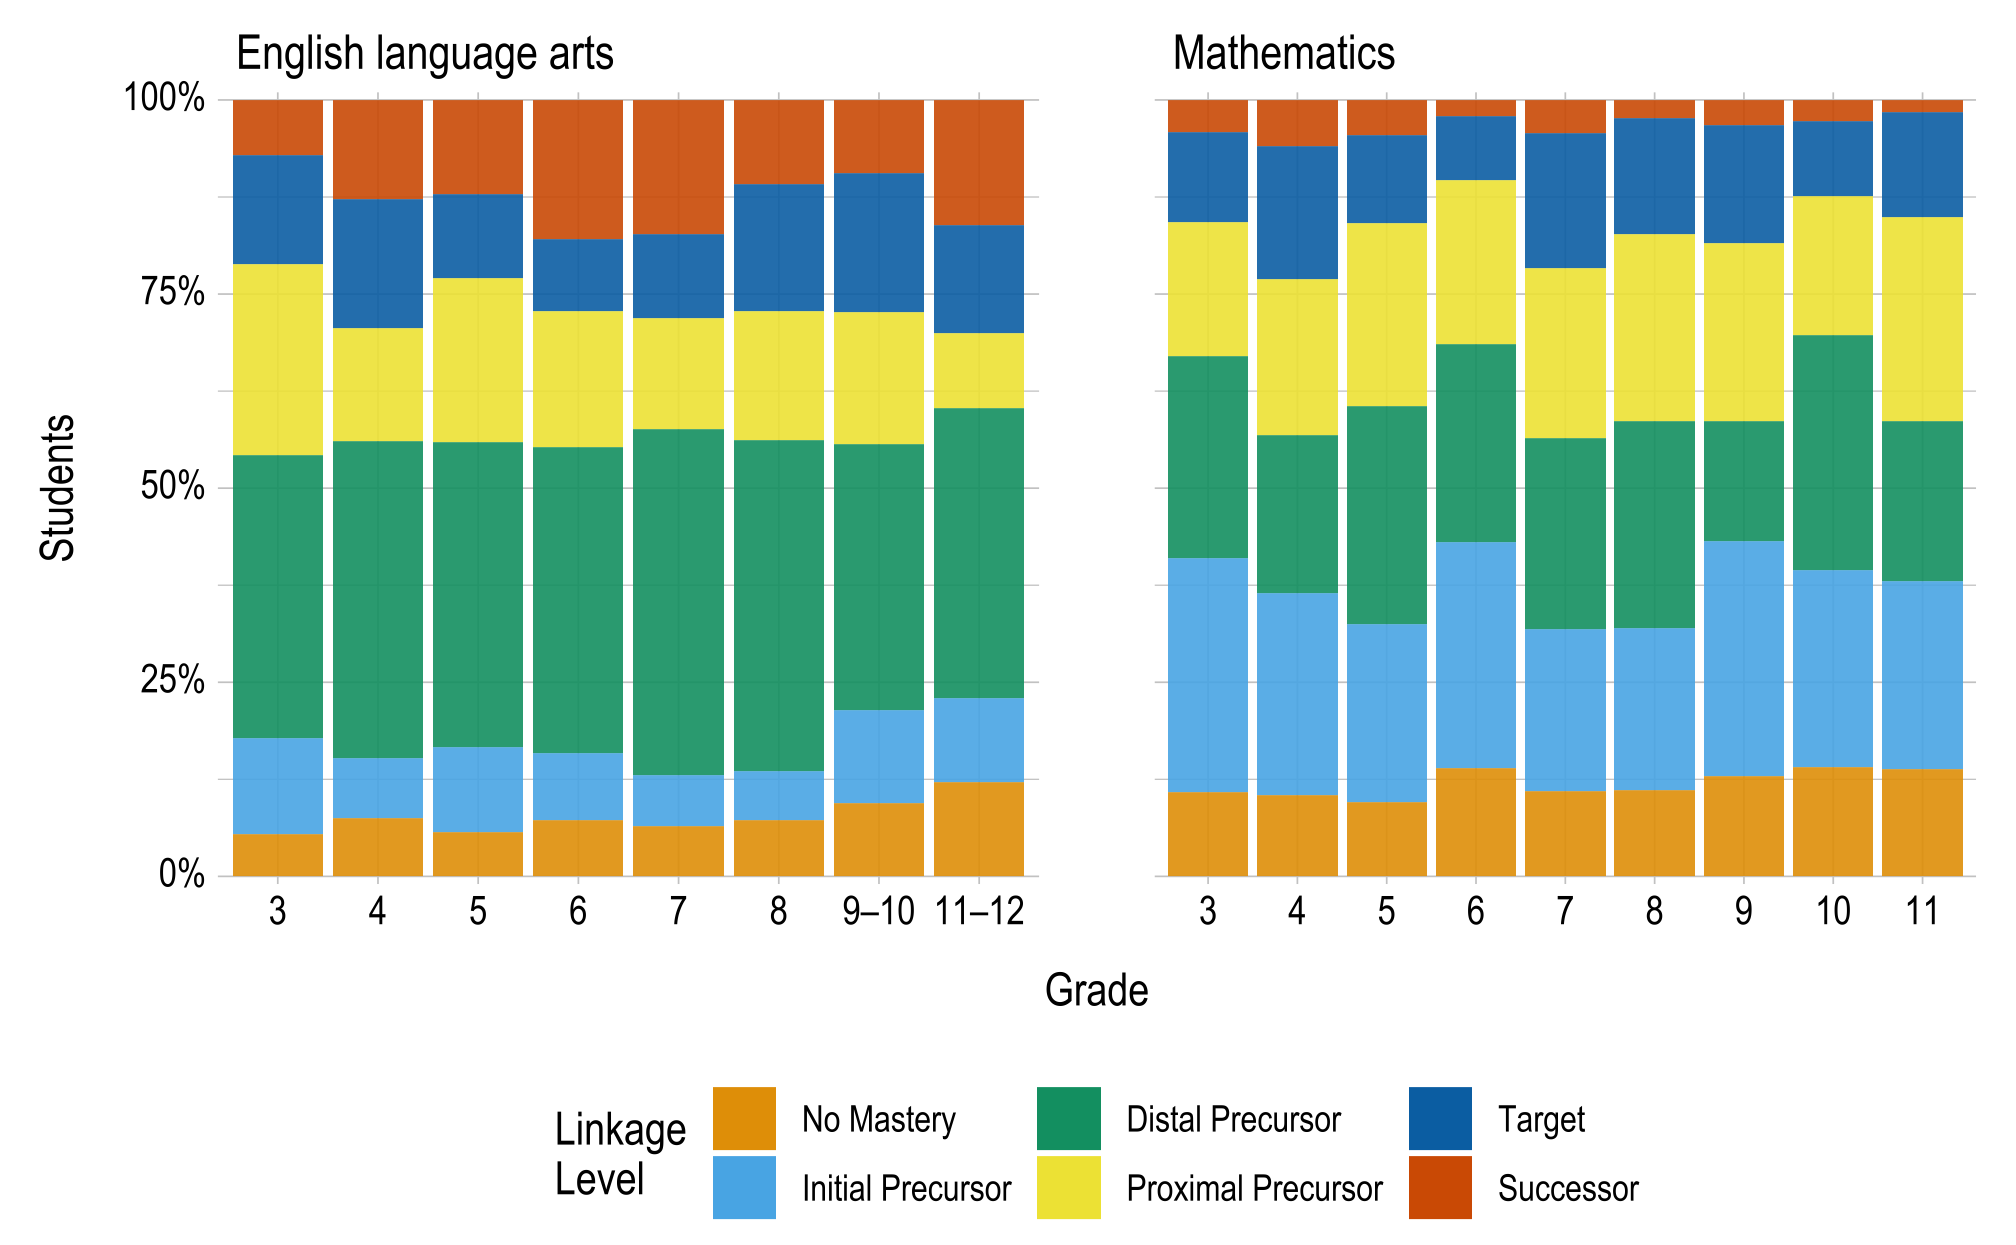 Two sets of stacked bar charts for ELA and mathematics. There is a bar chart for each grade, and the stacks within each bar chart represent a linkage level and the percentage of students who mastered that linkage level as their highest level. The highest linkage level for most students was below the Target level.